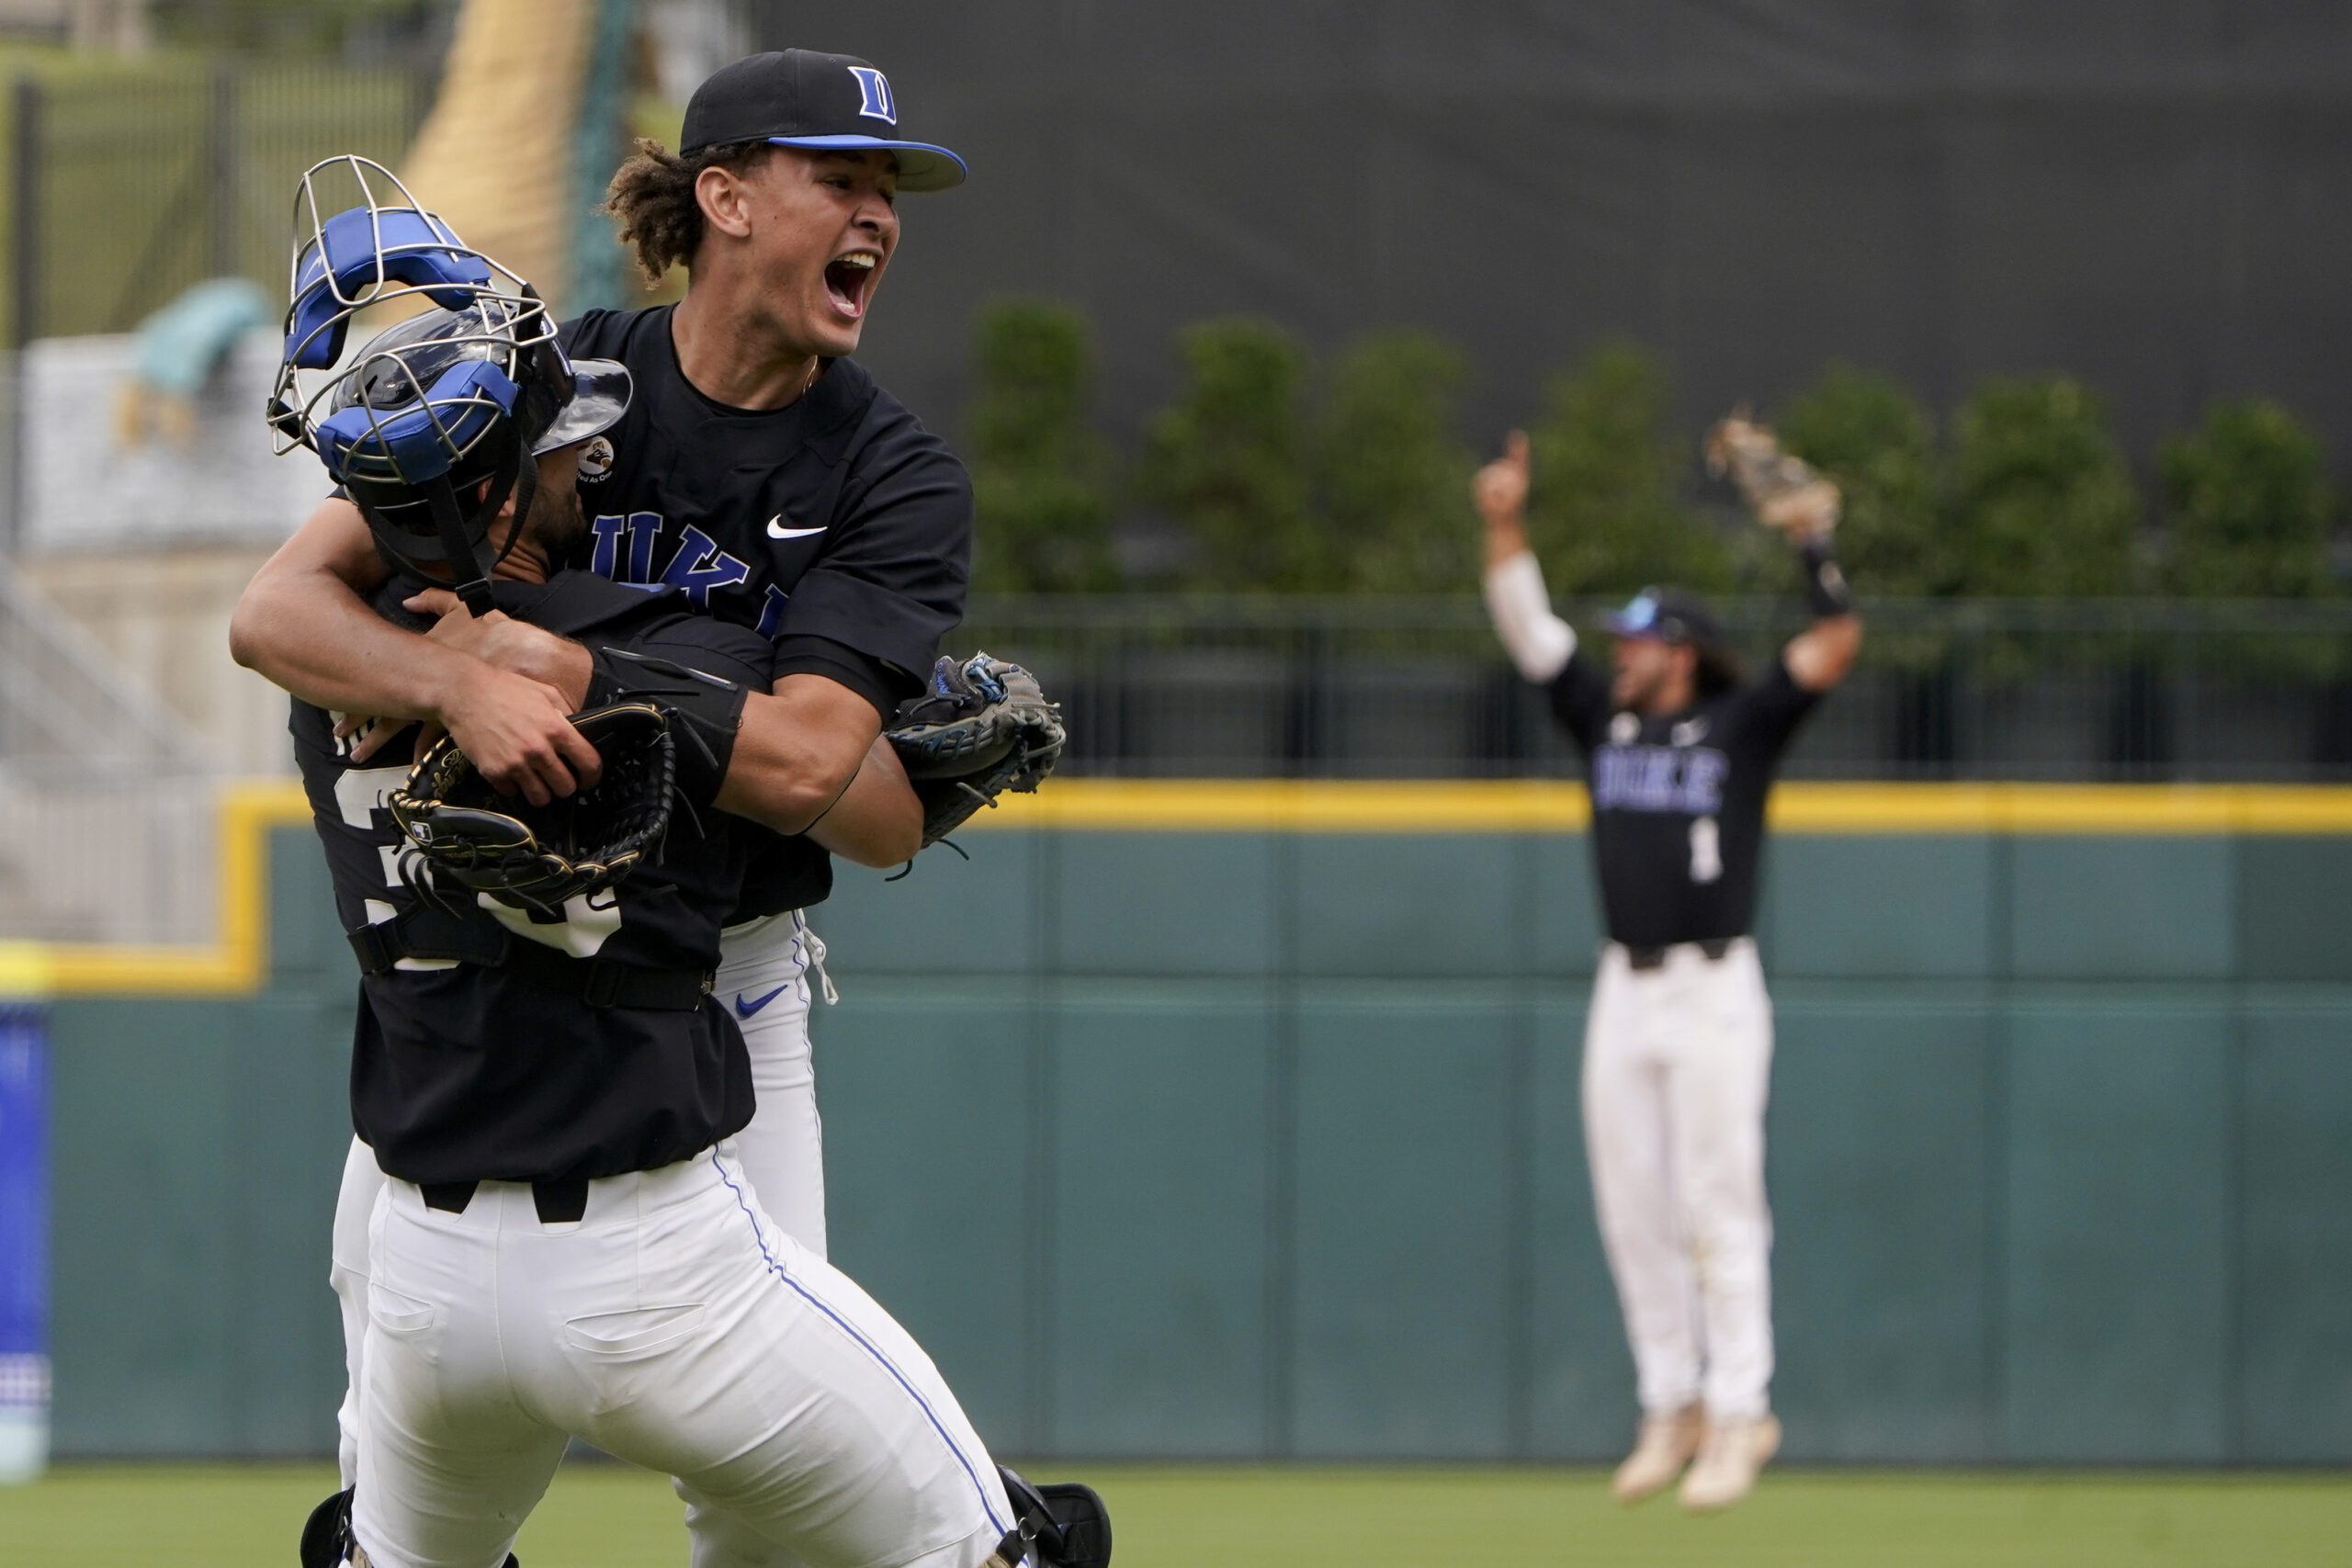 Duke beats State for first ACC baseball tournament title